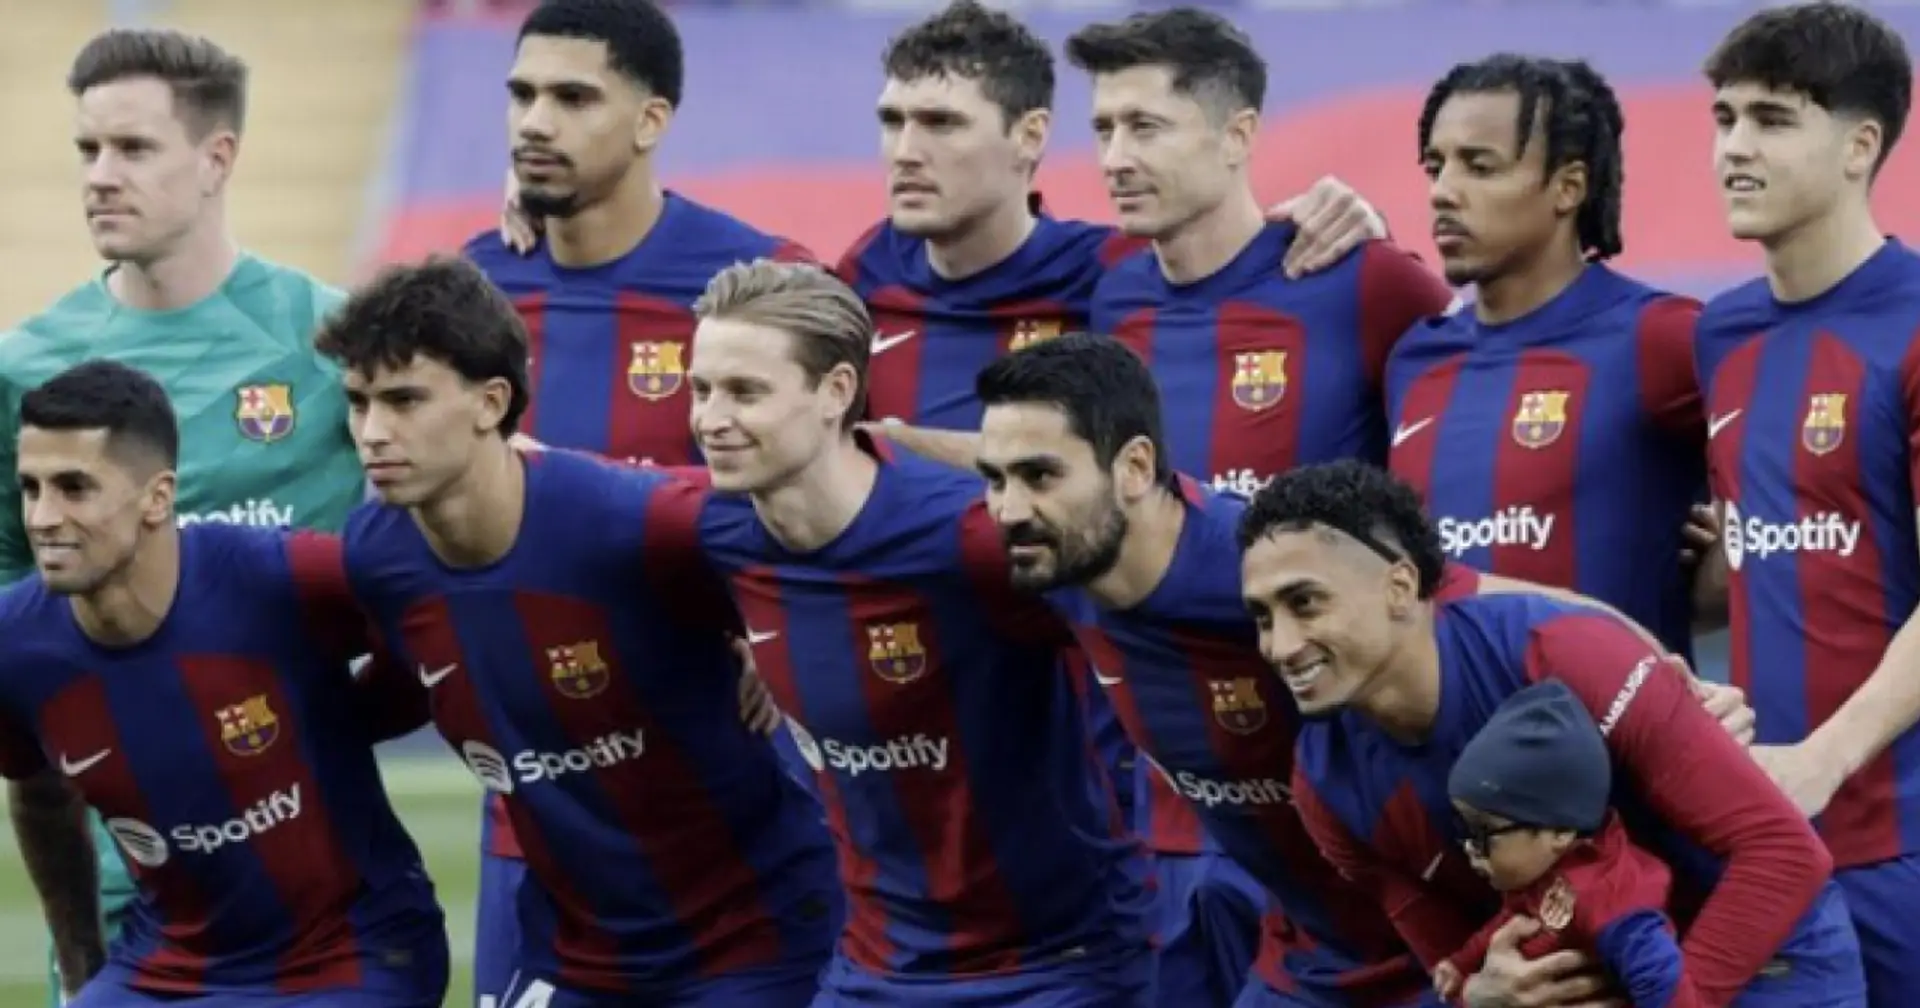 Barca prioritise selling 2 starters in summer – De Jong not one of them (reliability: 4 stars)